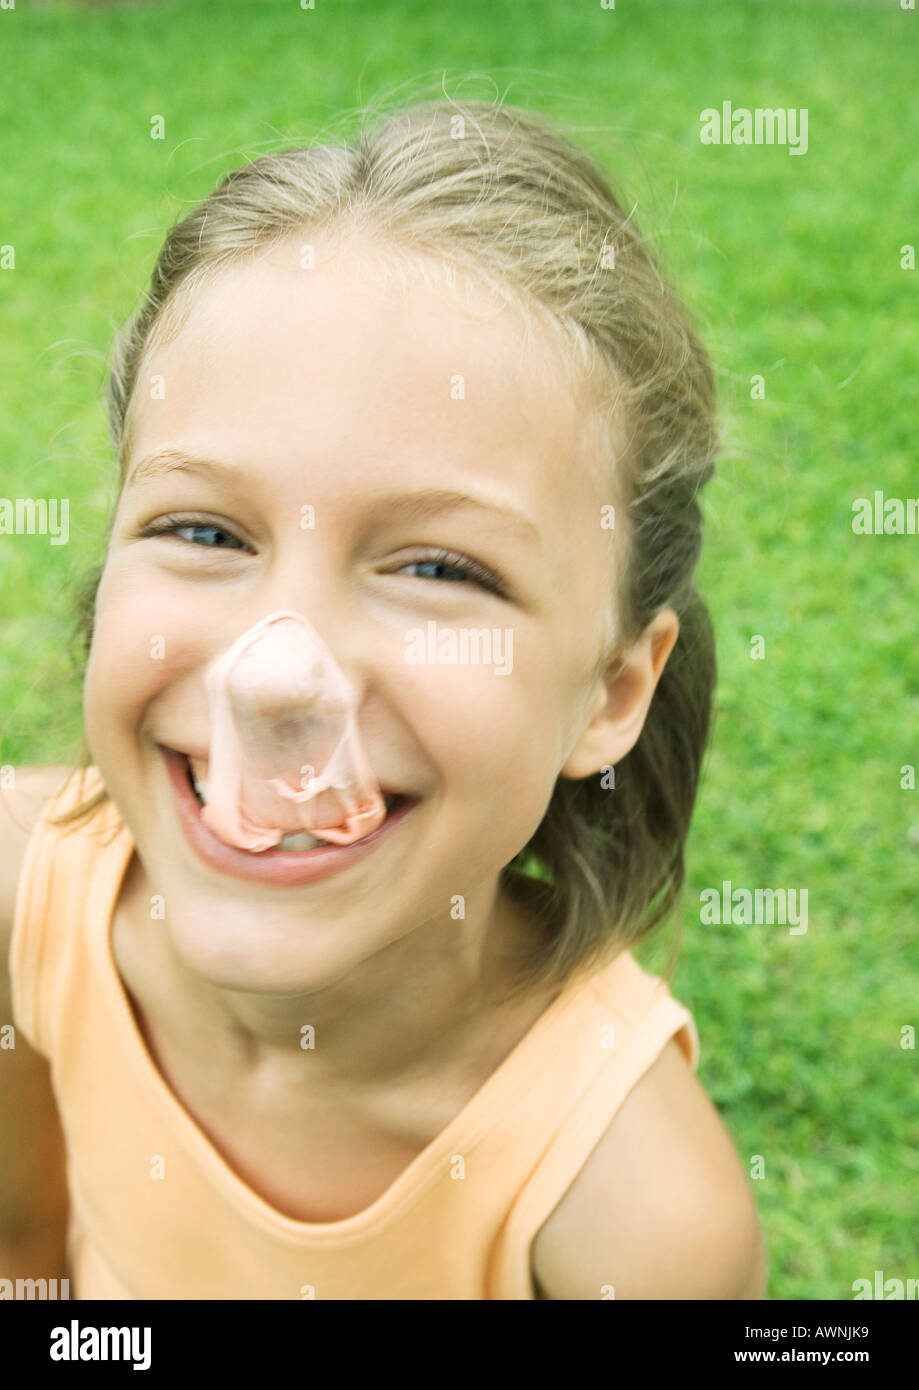 Girl with popped gum bubble on nose Stock Photo